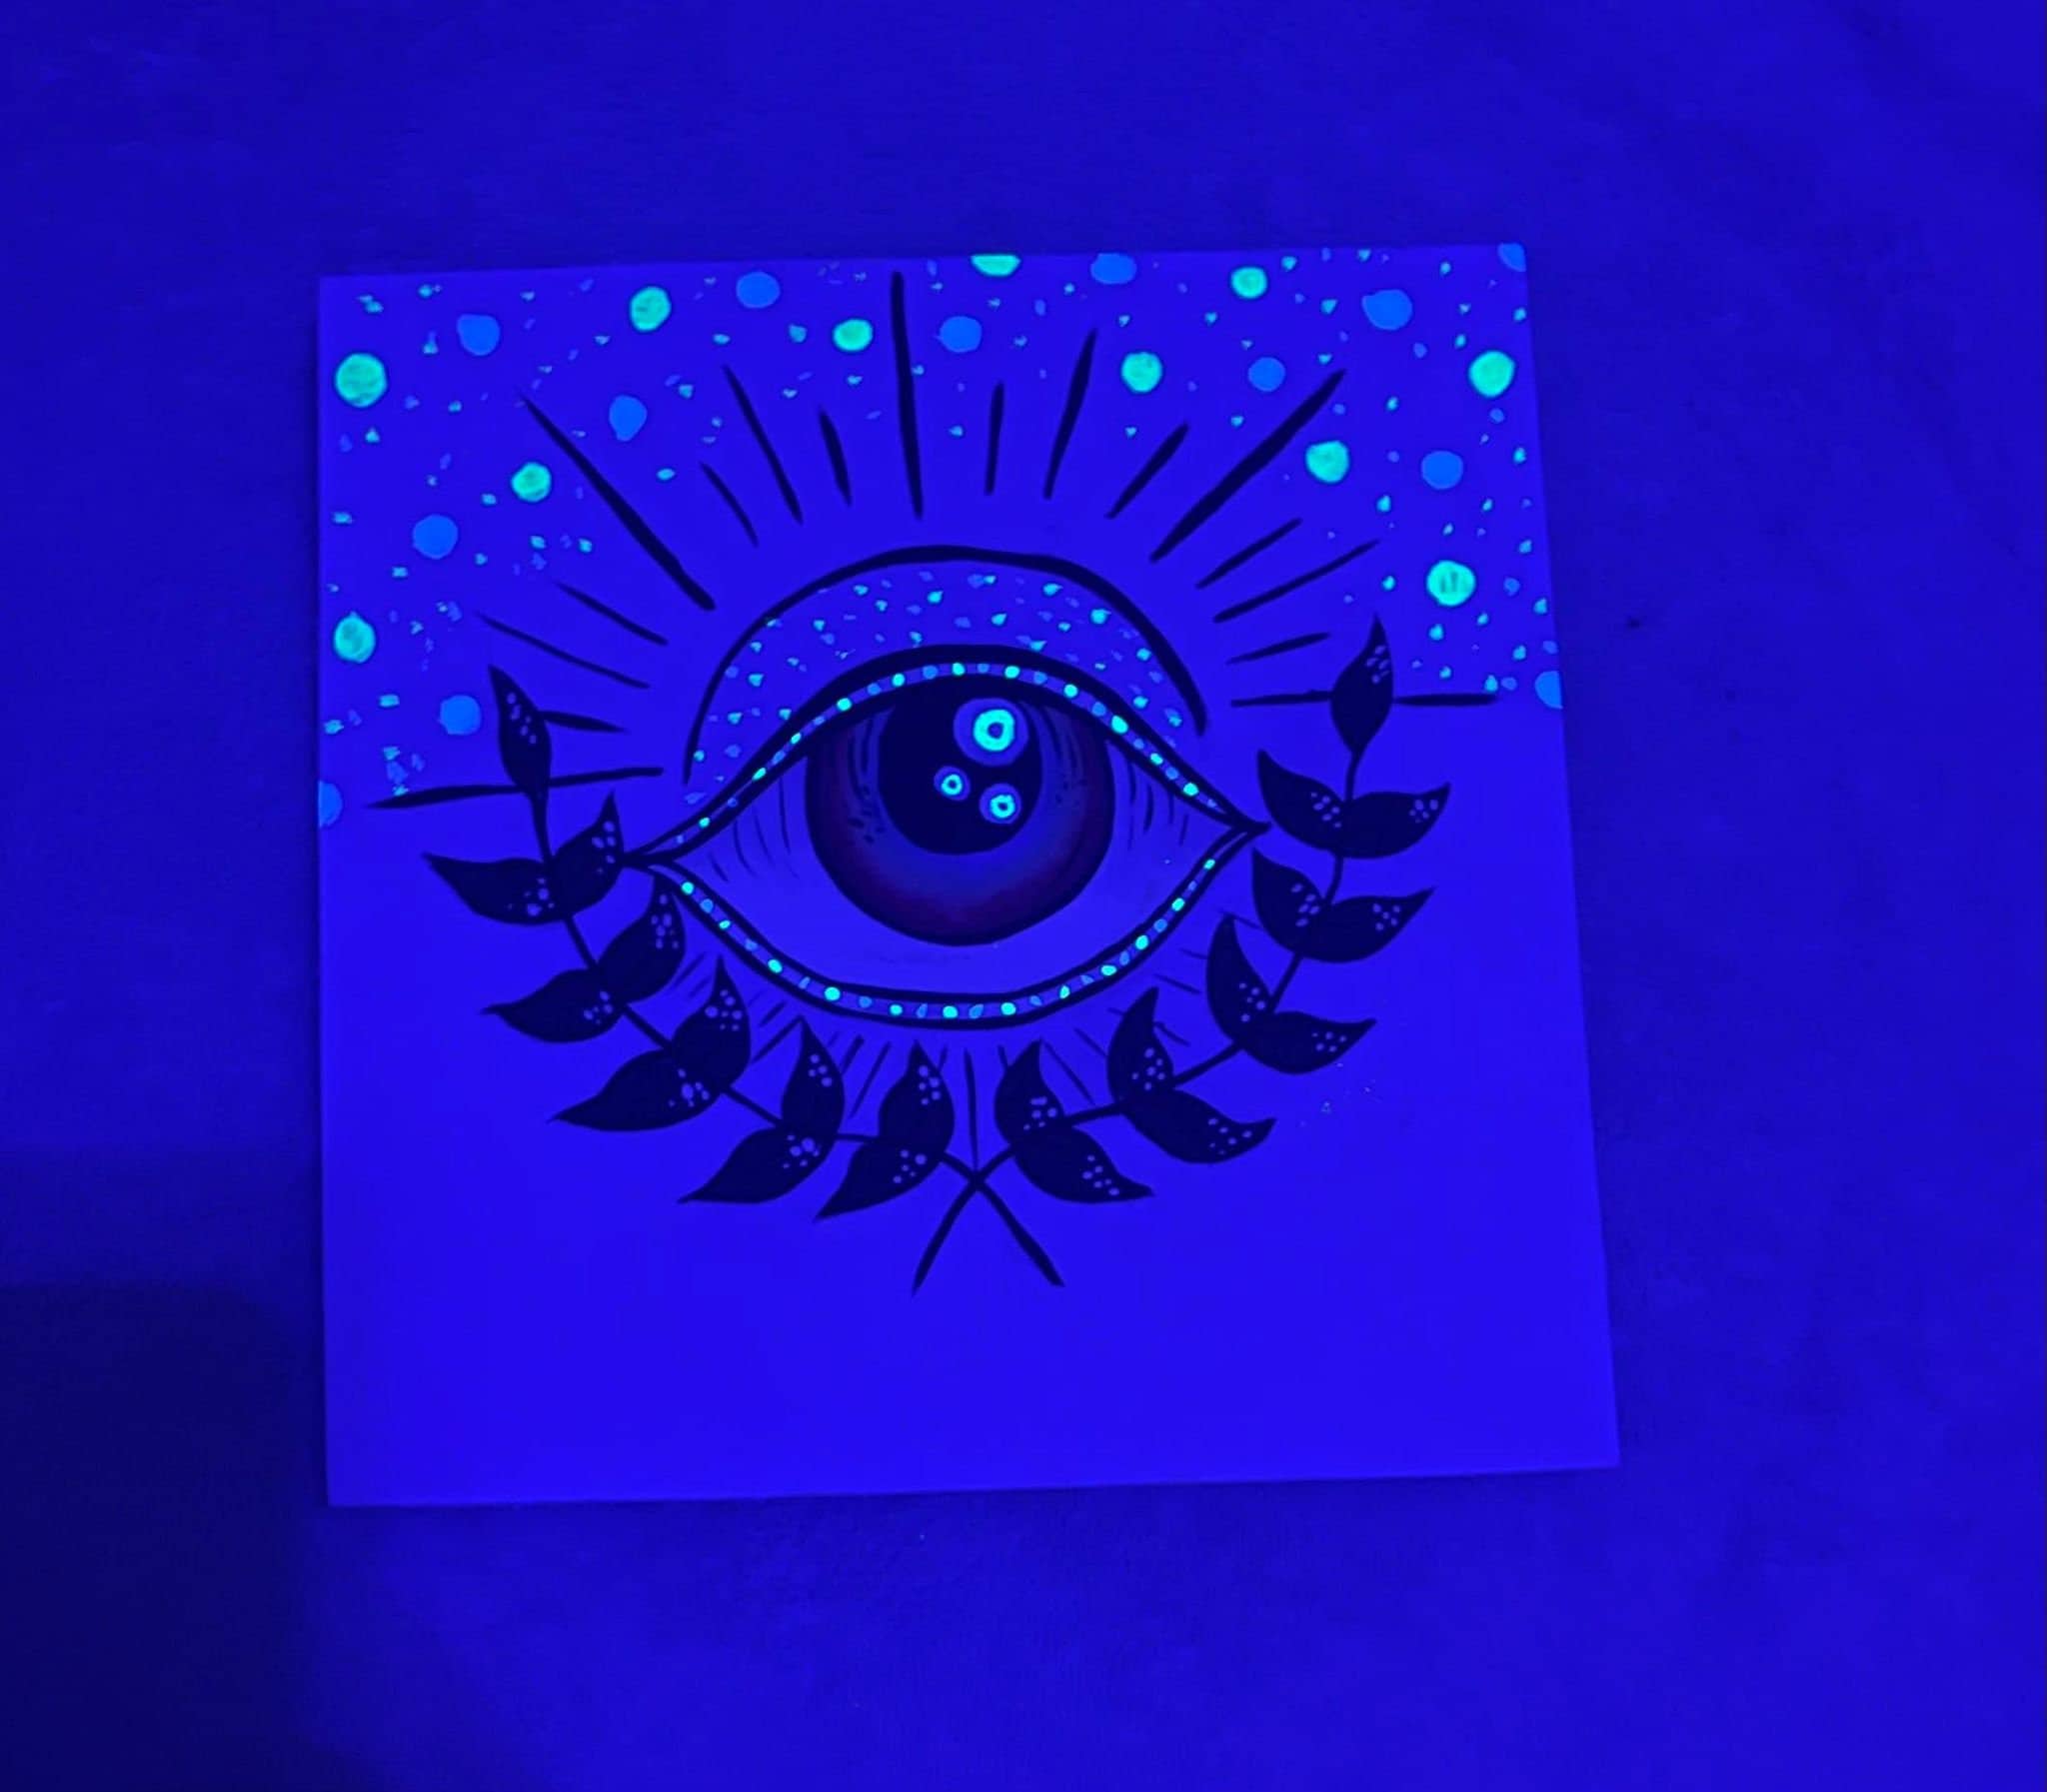 Eye Neon Sign - Good Luck Sign, Neon Decorations, Home Neon Sign